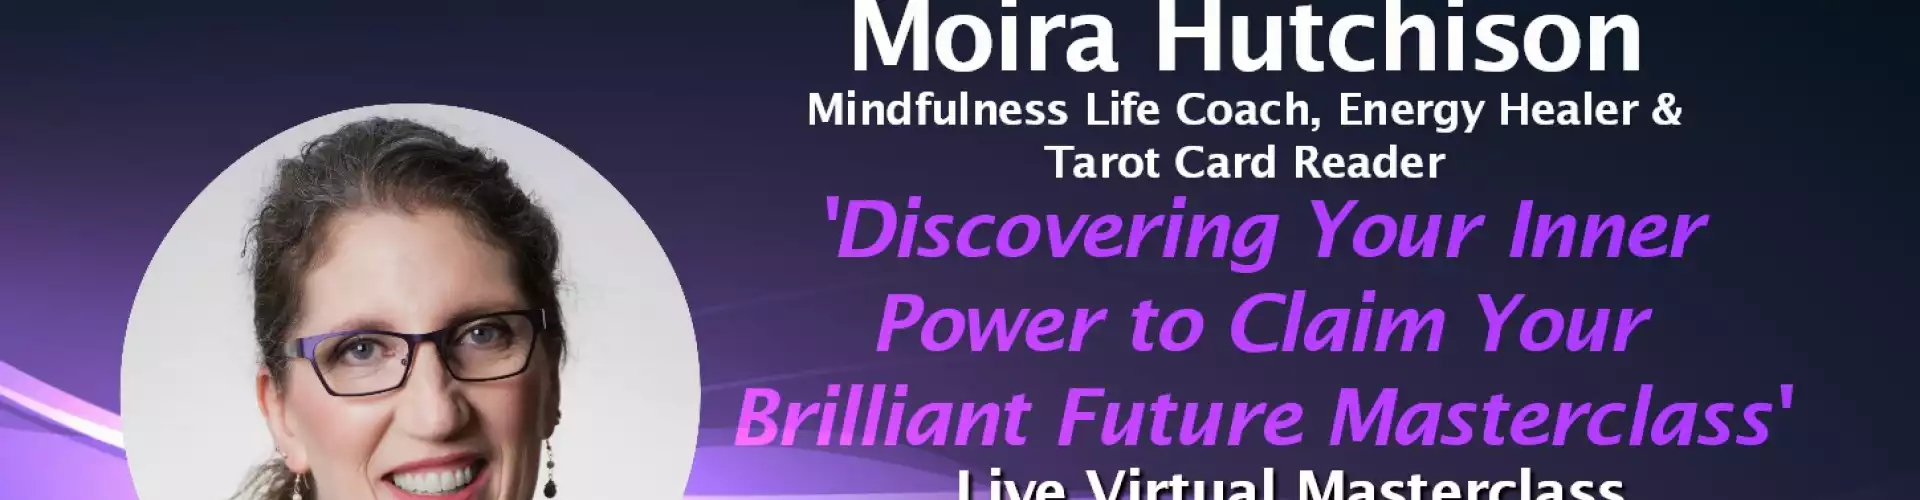 Discovering Your Inner Power to Claim Your Brilliant Future w WU Expert Moira Hutchison